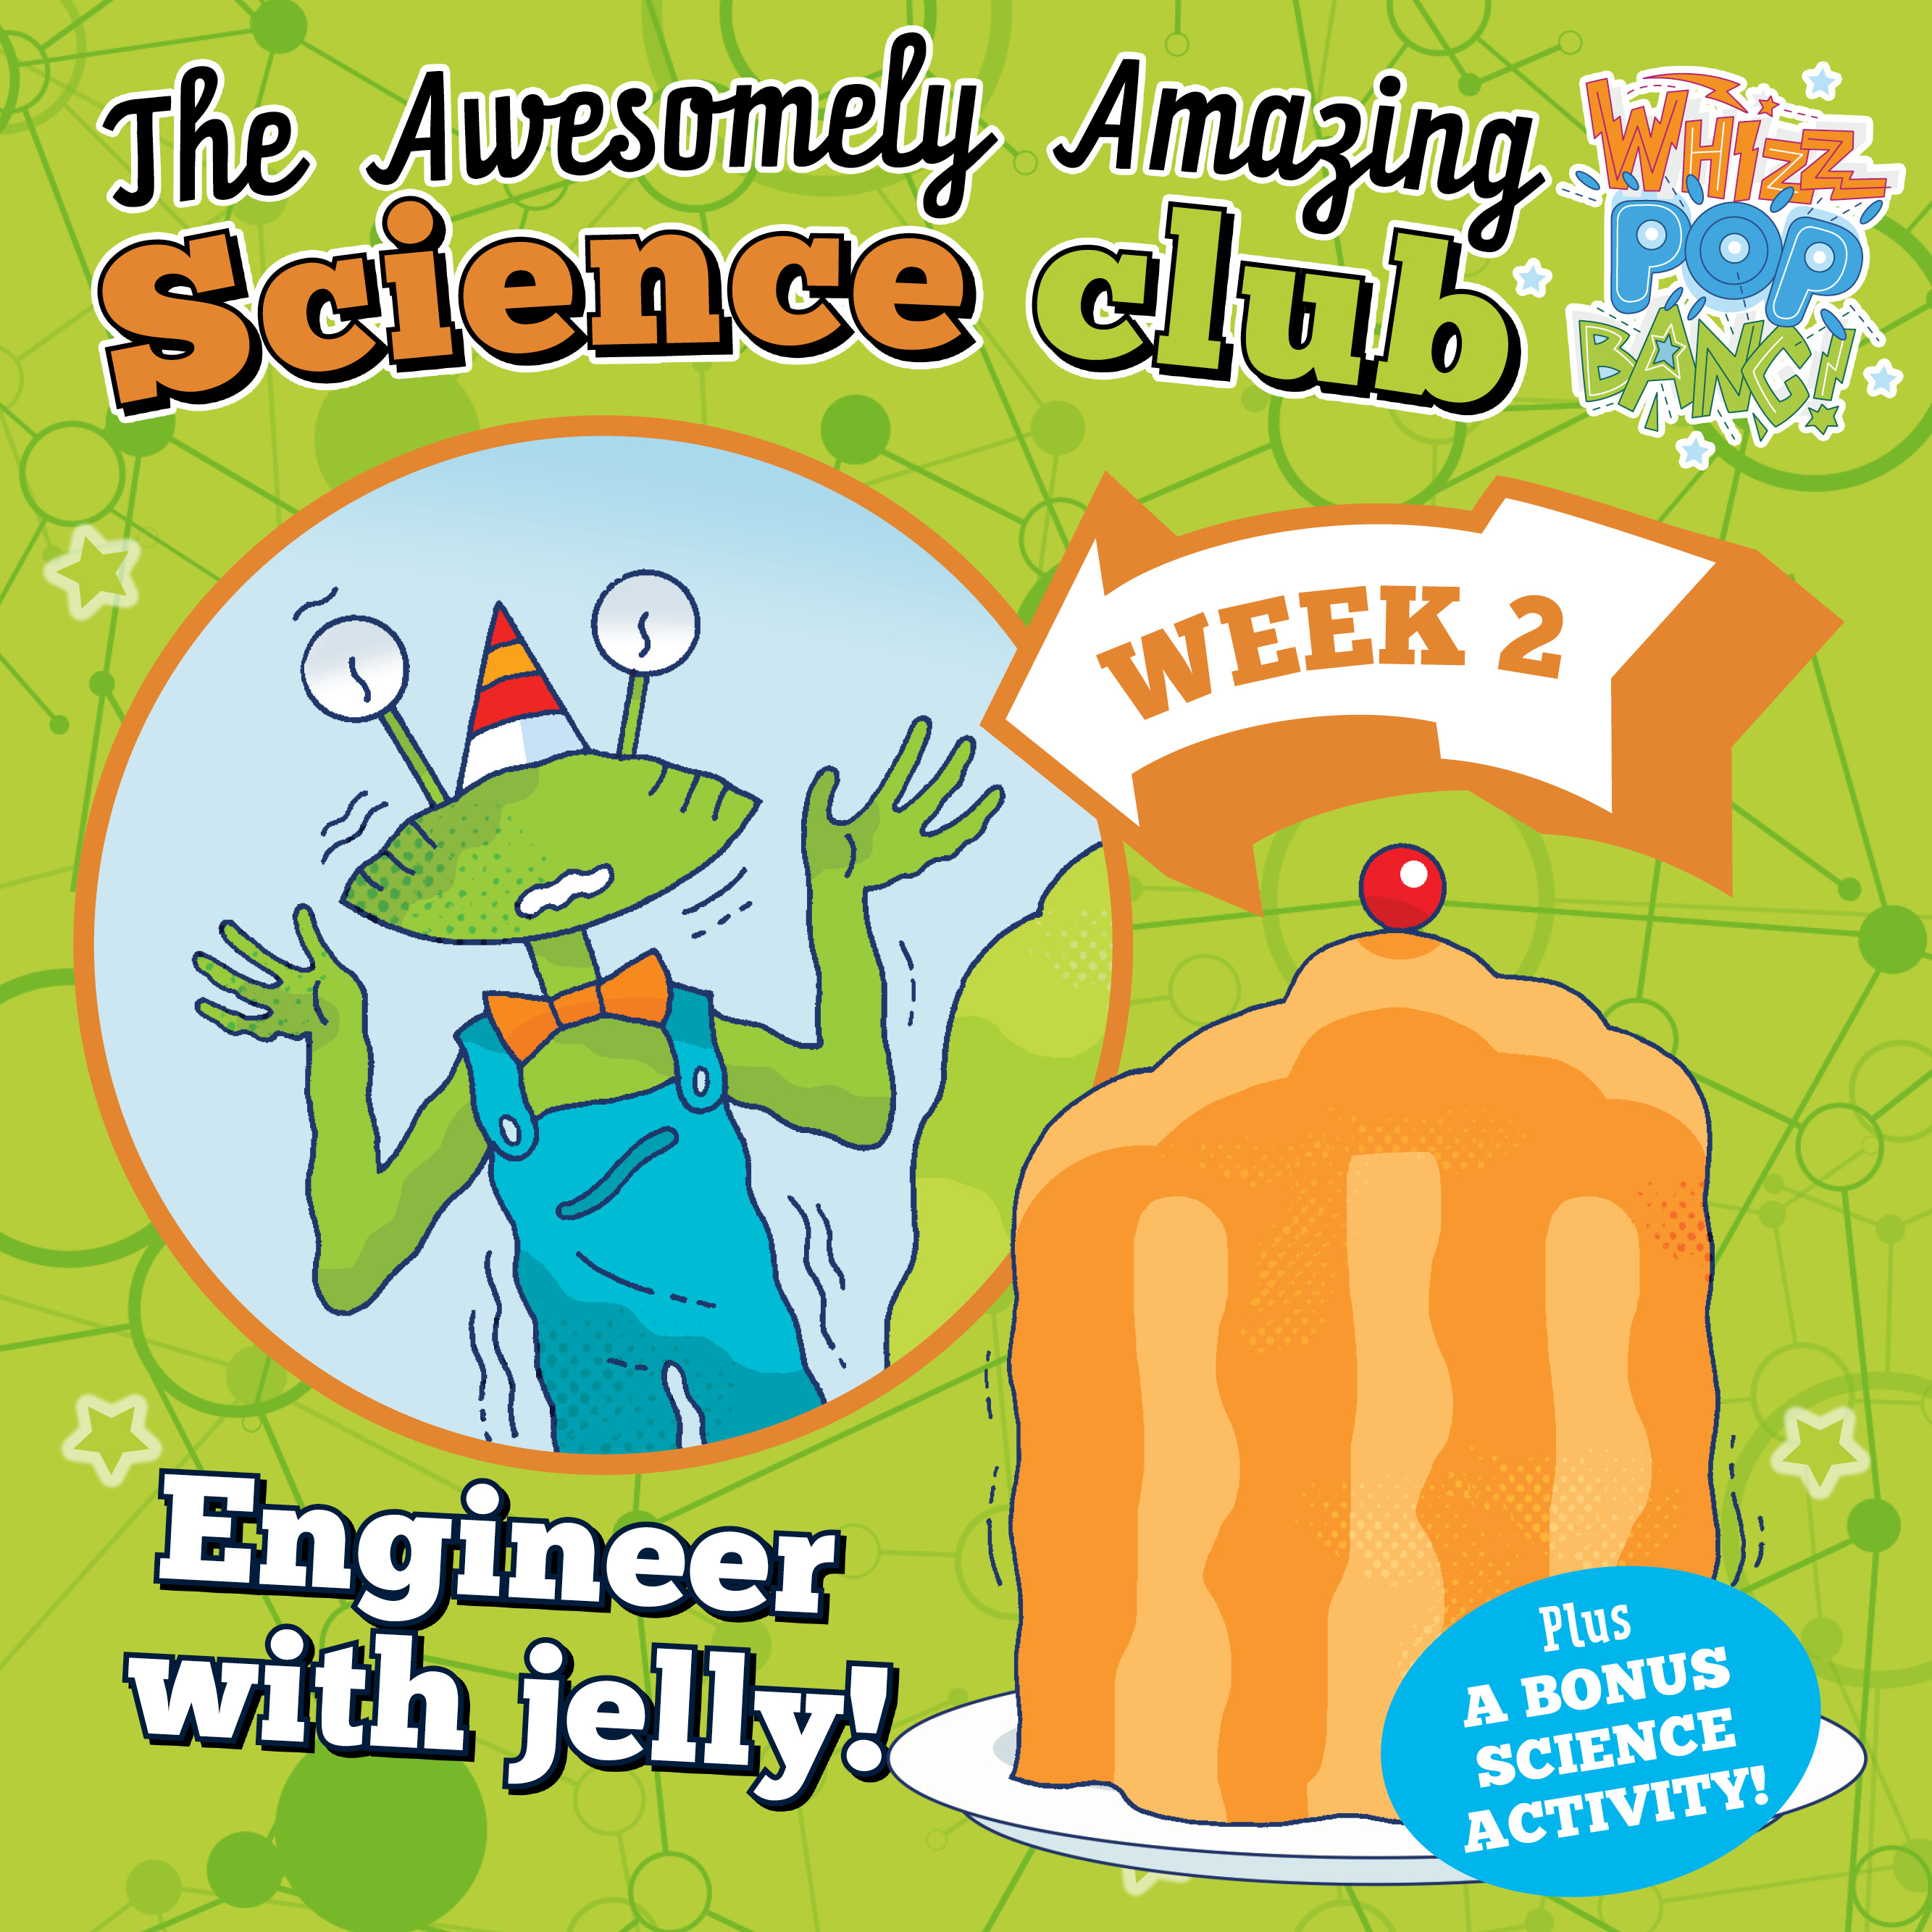 Science club - engineer with jelly activity